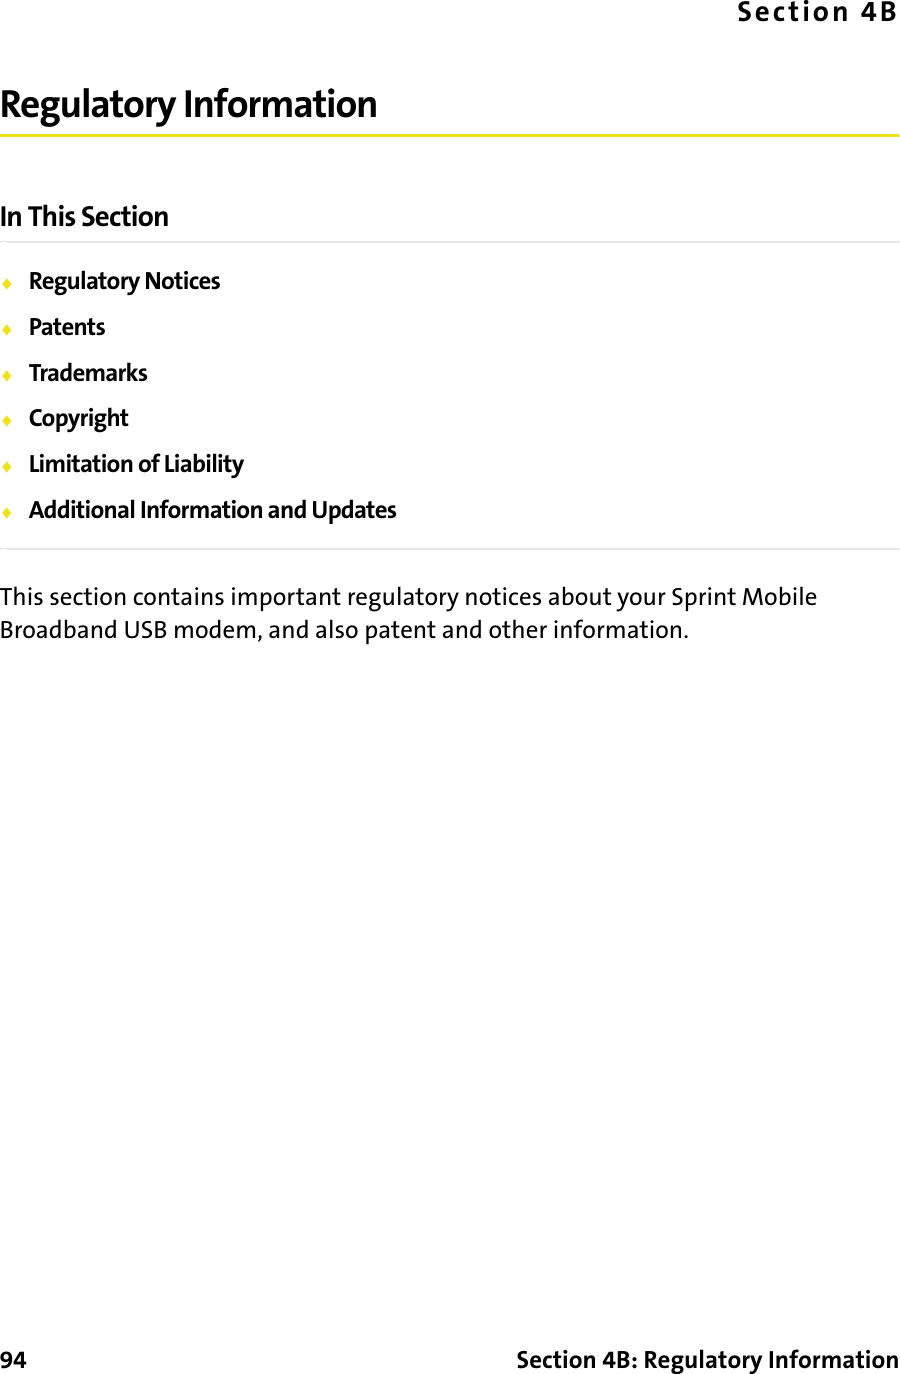 94 Section 4B: Regulatory InformationSection 4BRegulatory InformationIn This Section⽧Regulatory Notices⽧Patents⽧Trademarks⽧Copyright⽧Limitation of Liability⽧Additional Information and UpdatesThis section contains important regulatory notices about your Sprint Mobile Broadband USB modem, and also patent and other information.